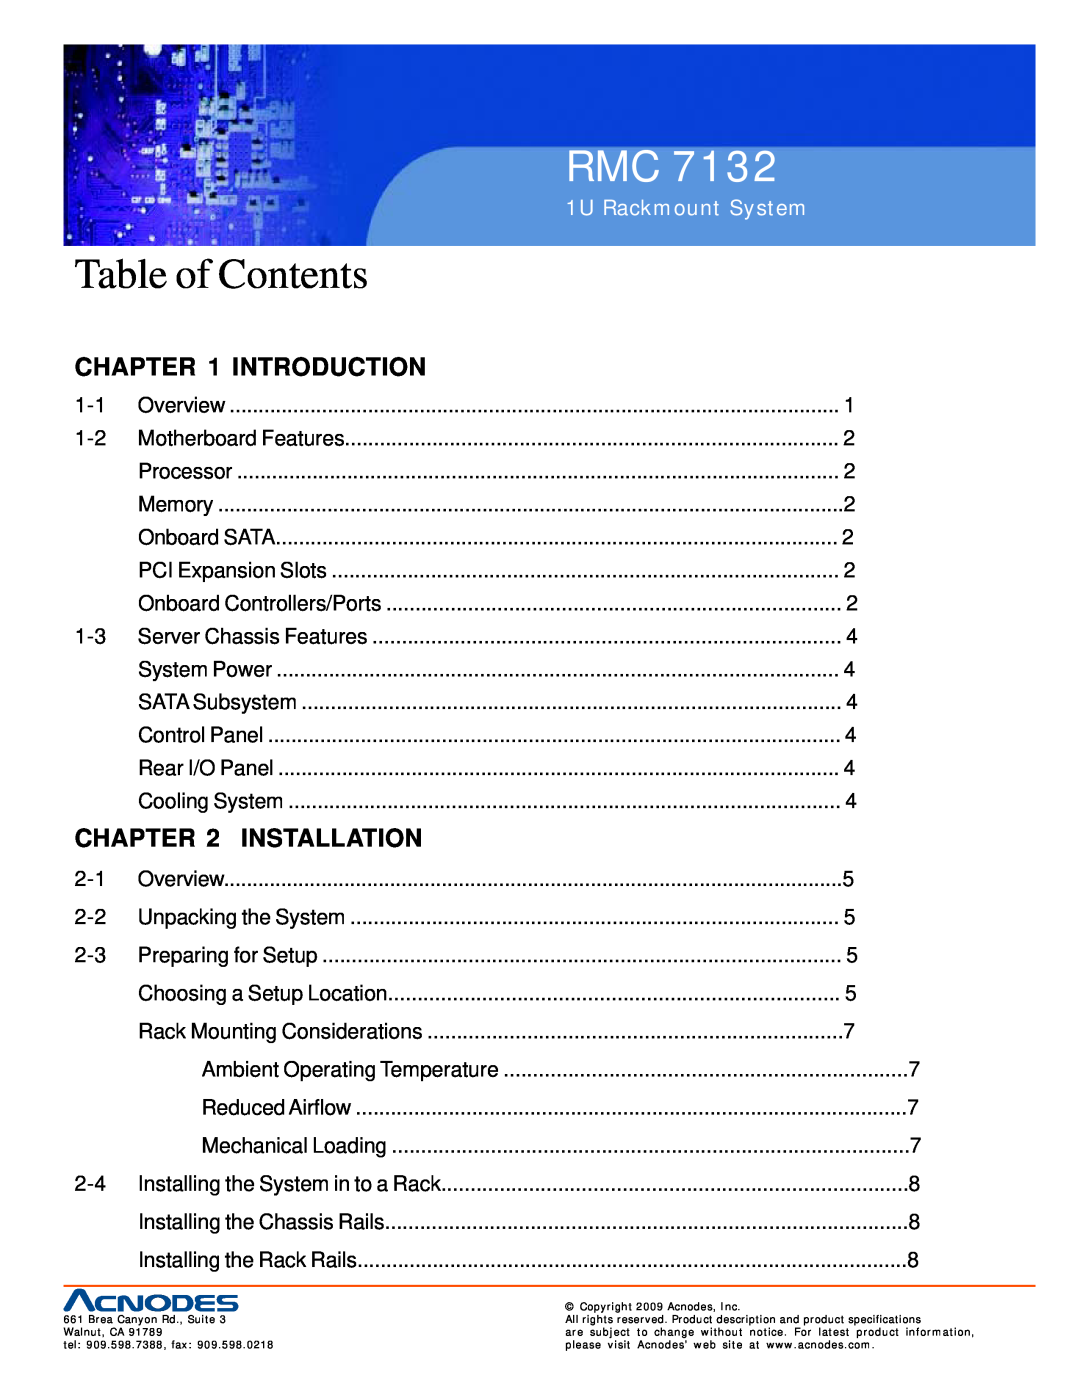 Acnodes RMC 7132 user manual Introduction, Installation, Table of Contents, 1U Rackmount System, Server Chassis Features 